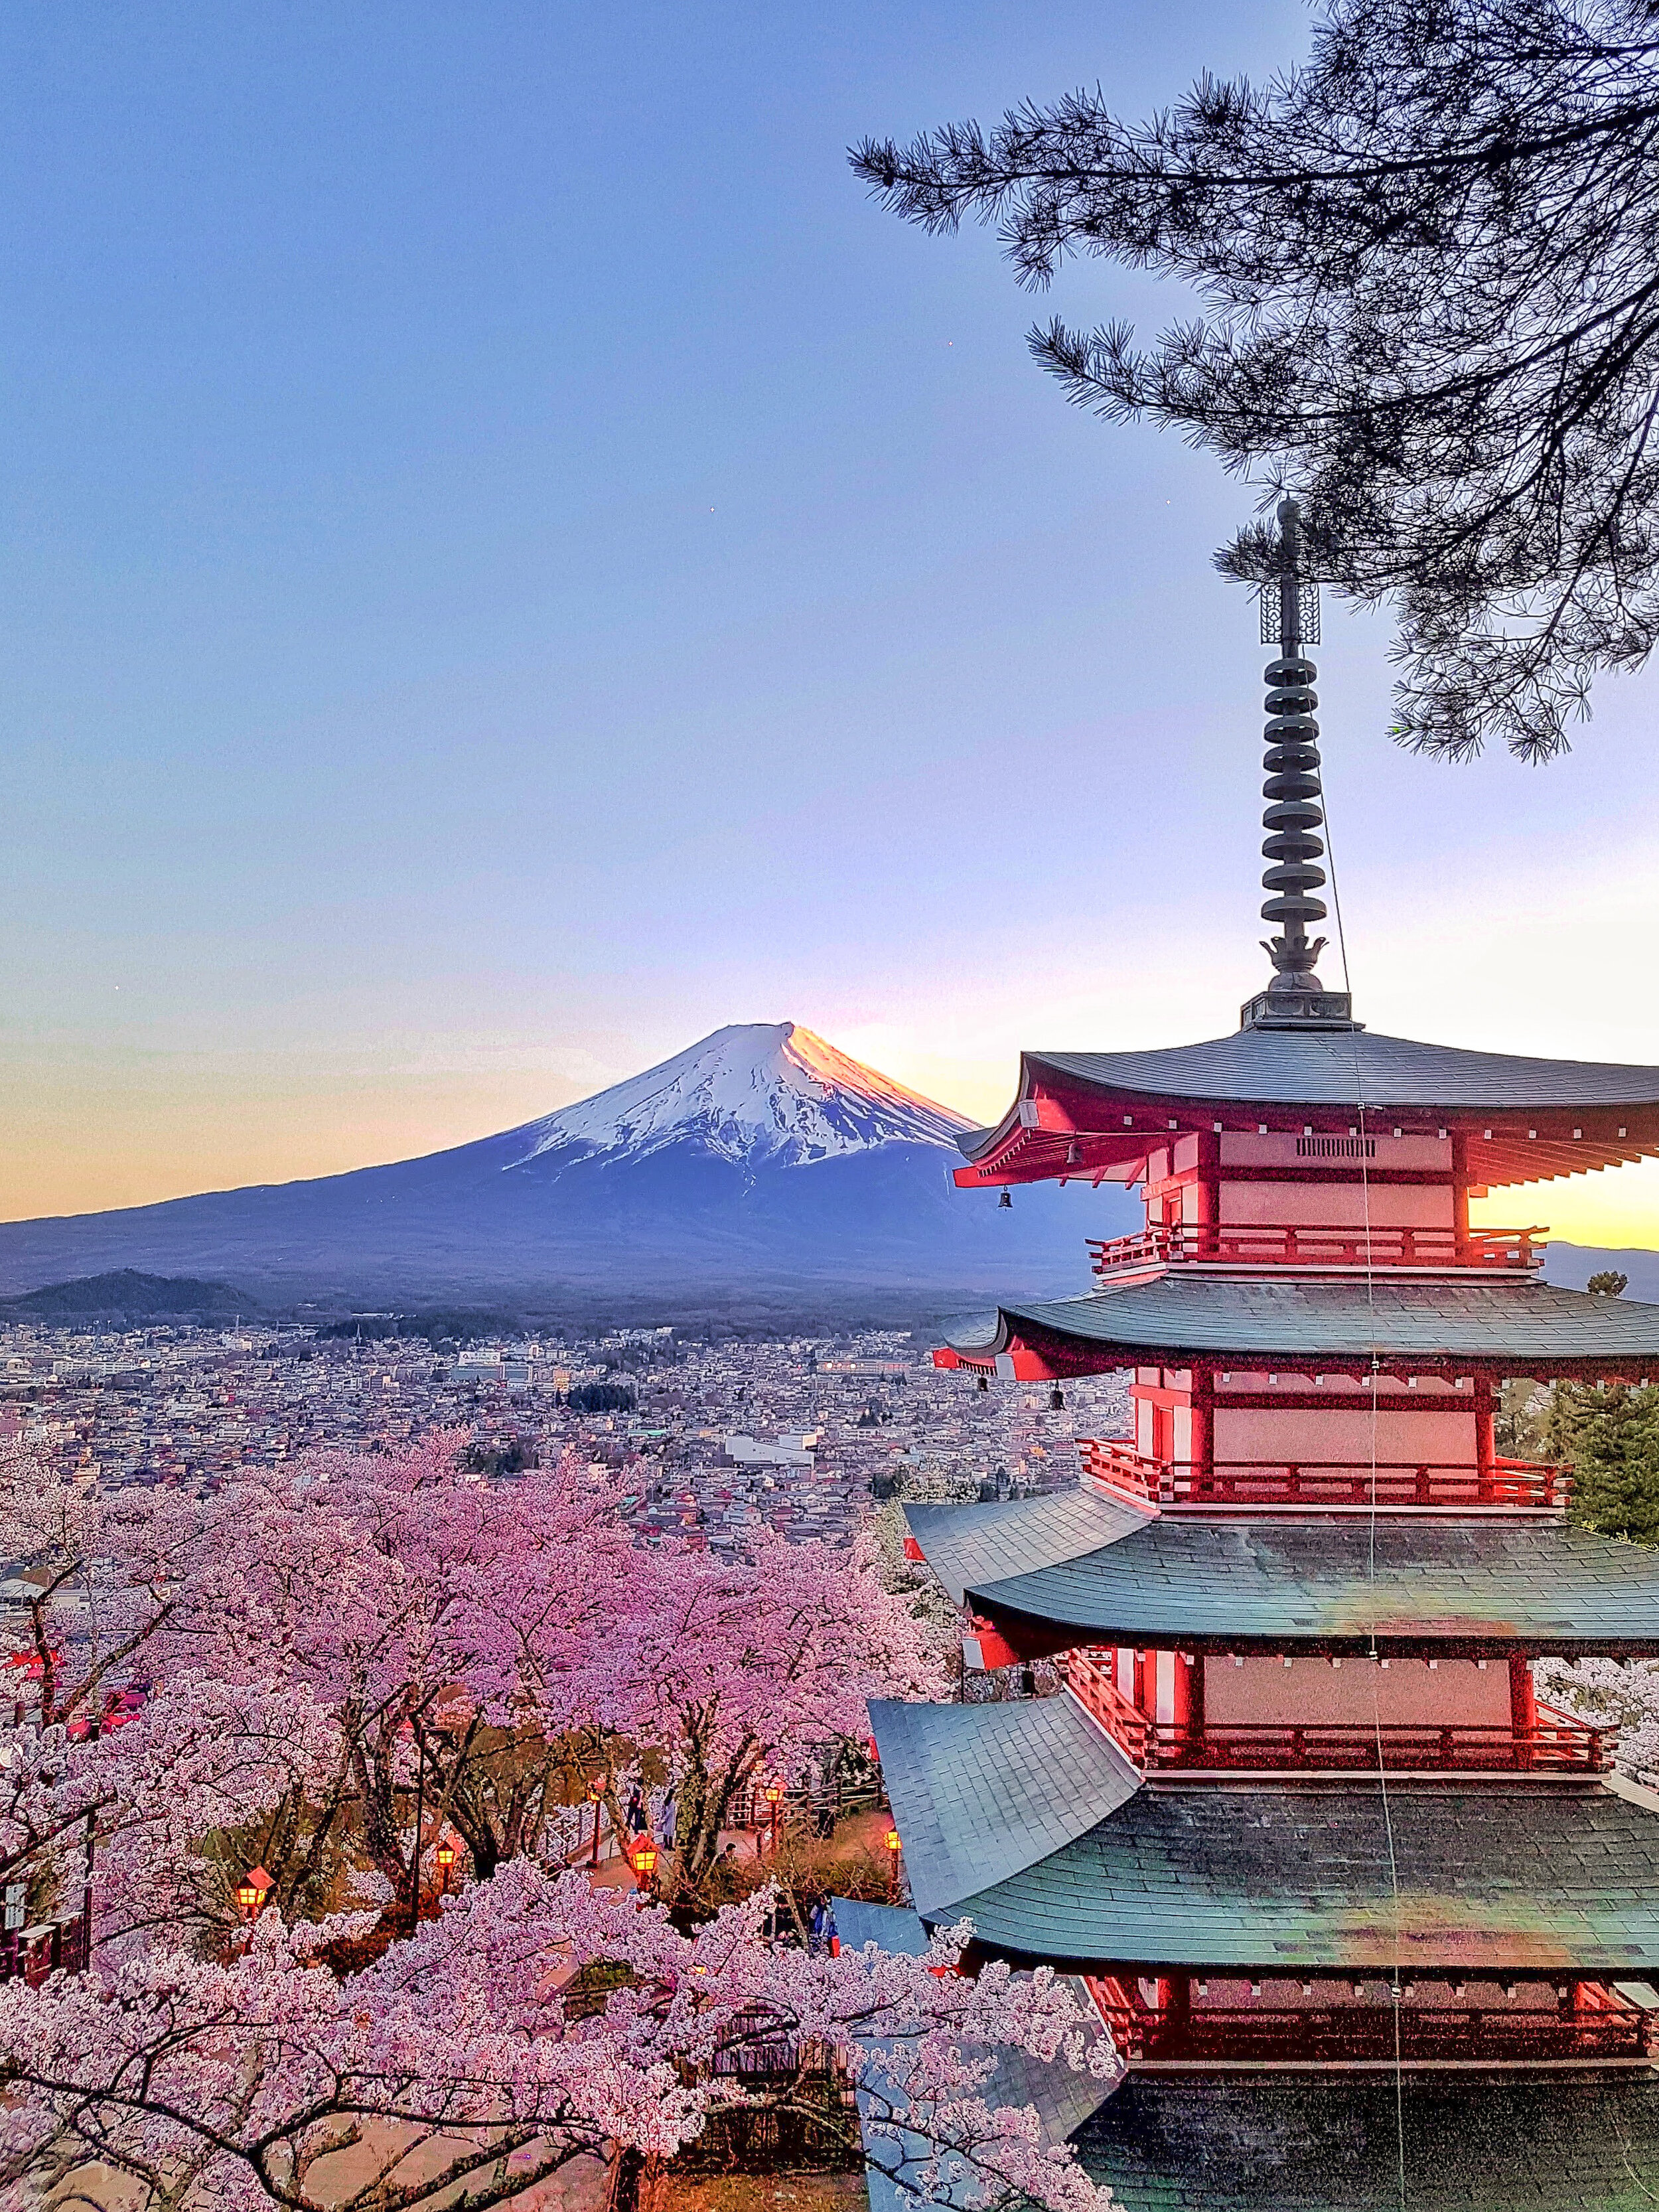 A red pagoda next to a pink cherry blossom tree with Mt. Fuji in the distance